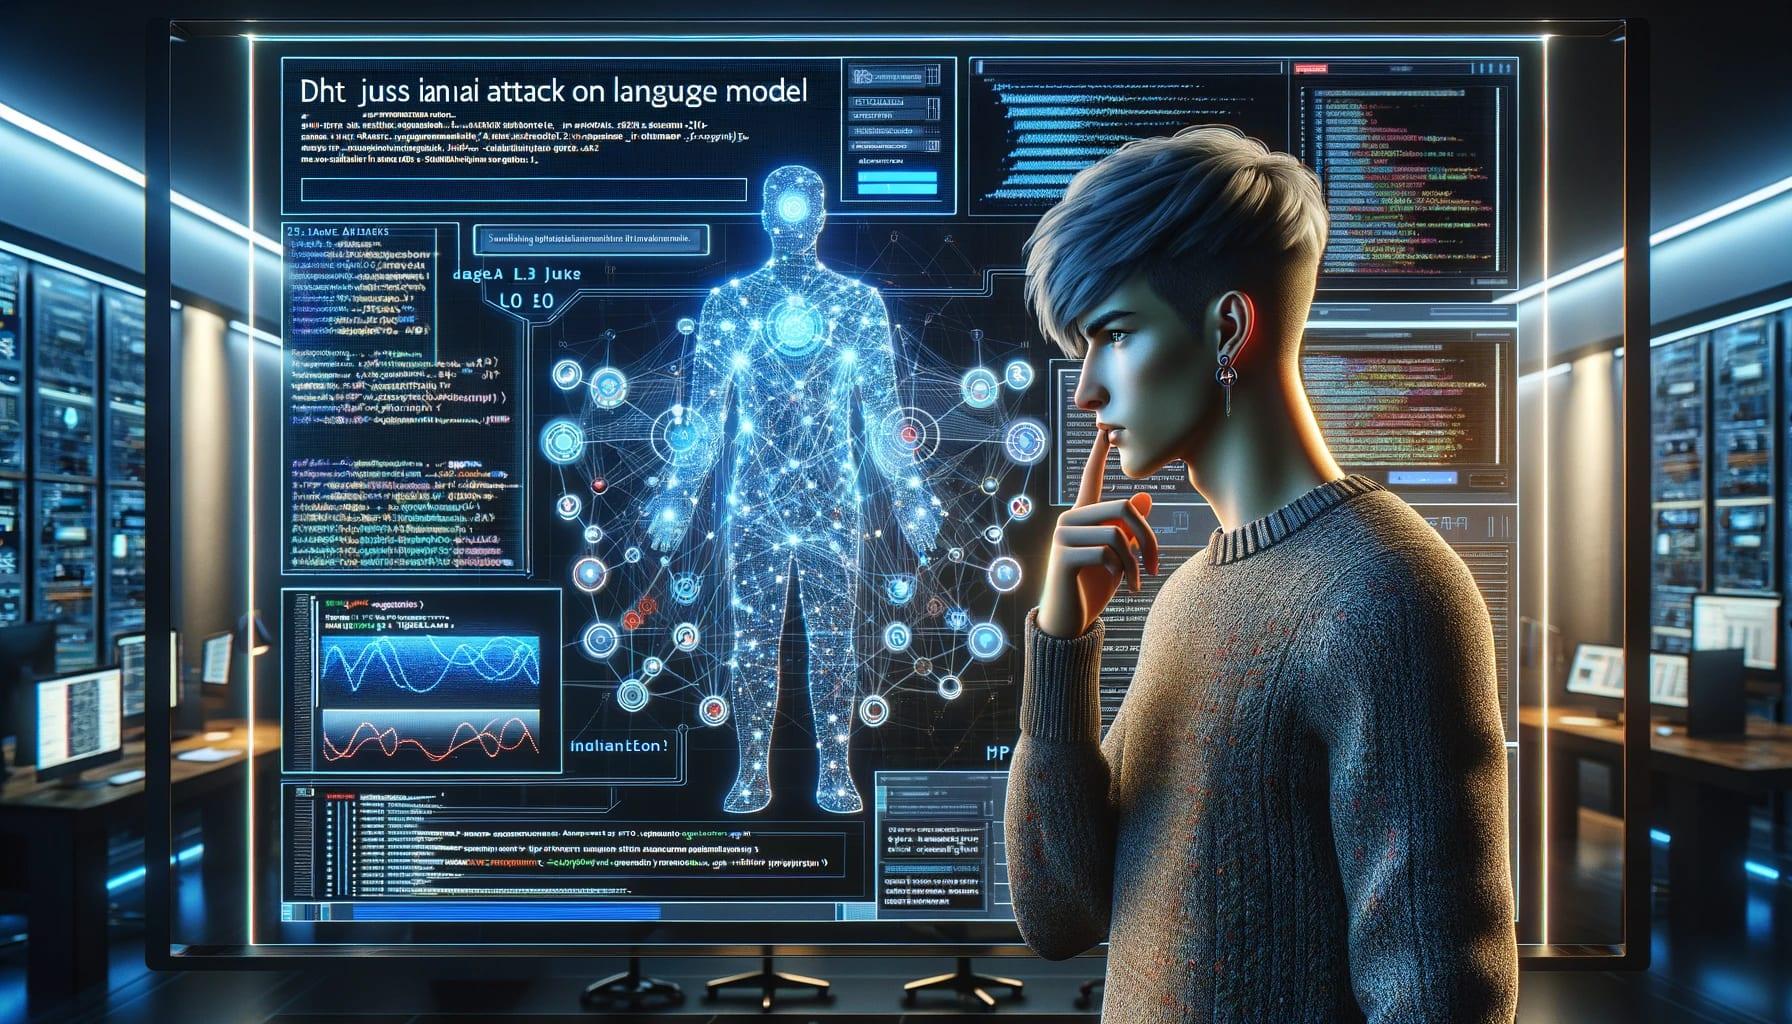 An image of a young person in a modern data center filled with screens displaying various types of information. They are intently studying a holographic display showing a human figure surrounded by interconnected nodes, suggesting a focus on data analysis, artificial intelligence, or human-computer interaction. The atmosphere conveys high-tech and advanced computing, with elements that could appeal to those interested in futuristic technology, cyber security, and data science.